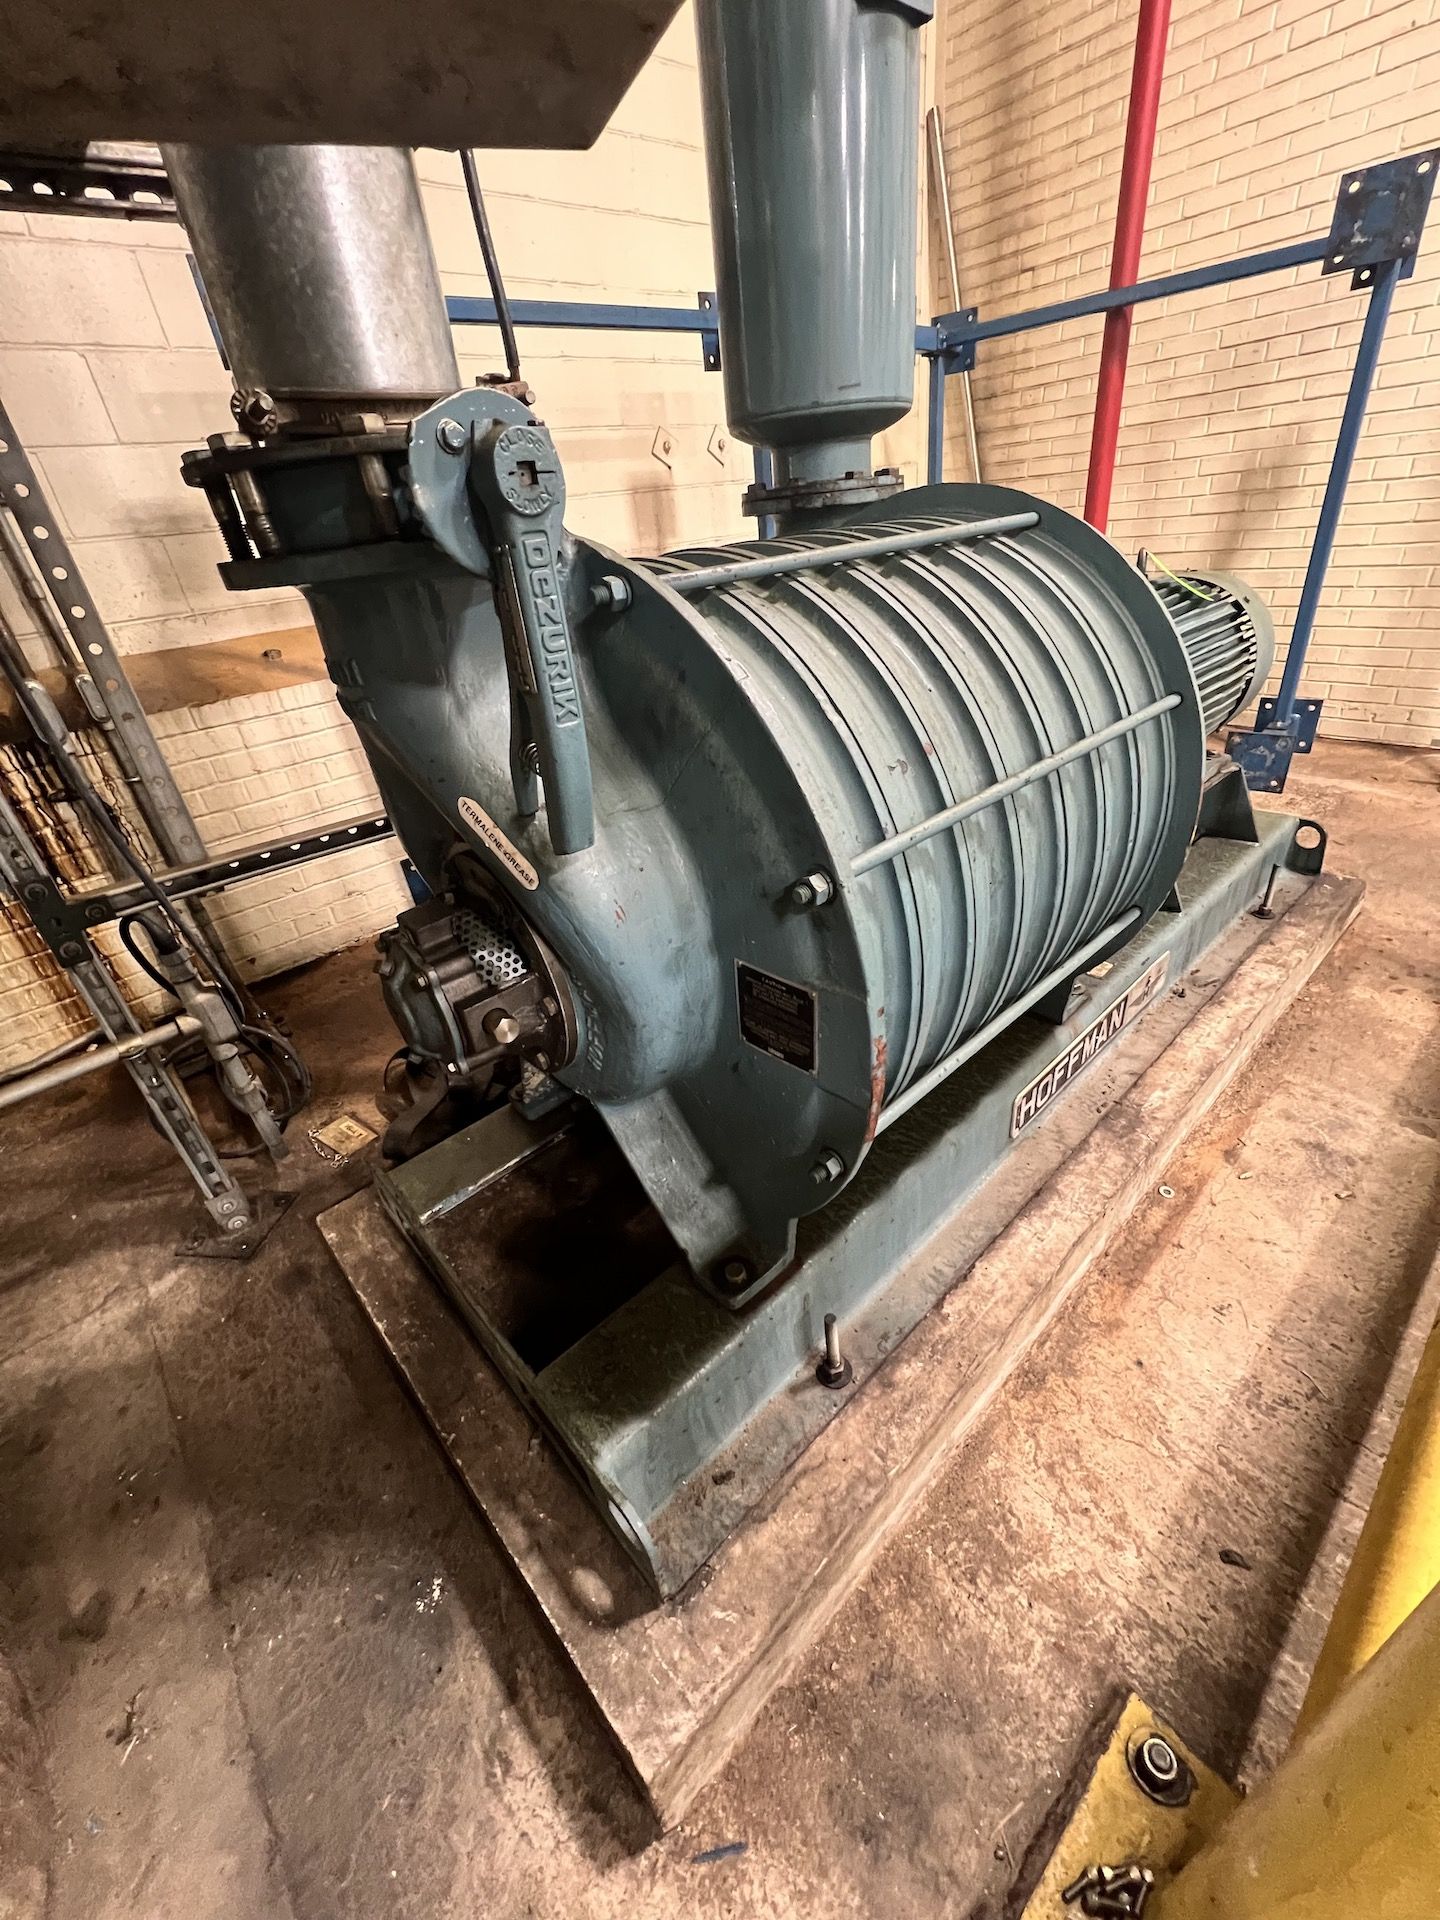 HOFFMAN CENTRIFUGAL EXHAUSTER / BLOWER, MODEL 38308E, S/N M105950, 50-HP, 3535 RPM, 230/460 V - Image 3 of 15